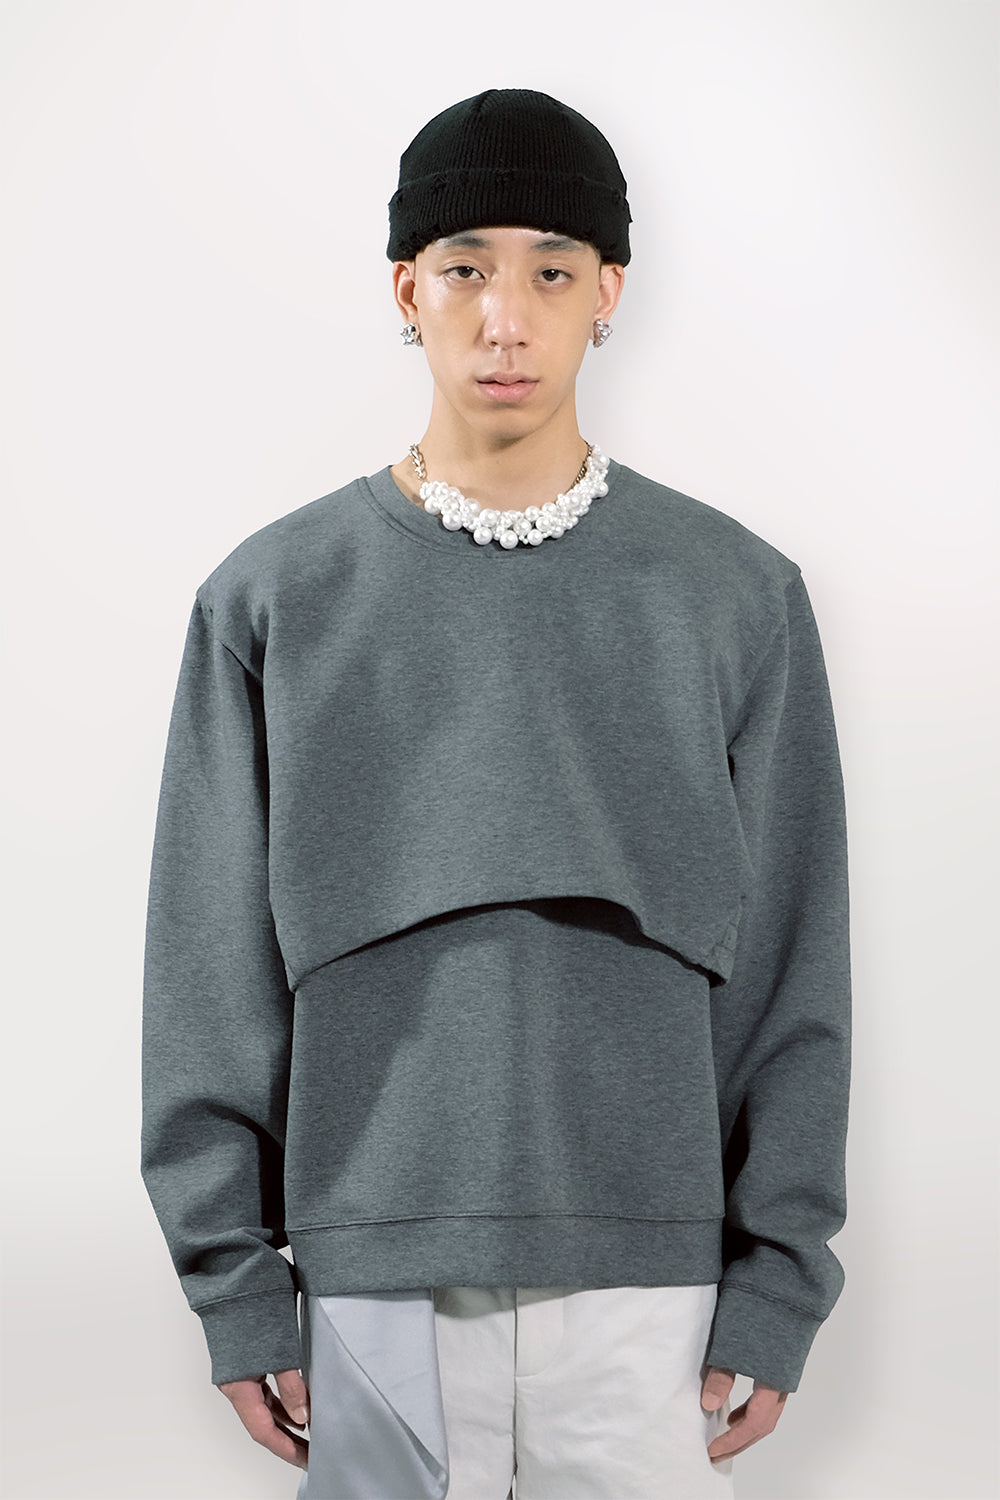 SEANNUNG - MEN - Double-Layered Oversized Top 雙層剪裁大學T